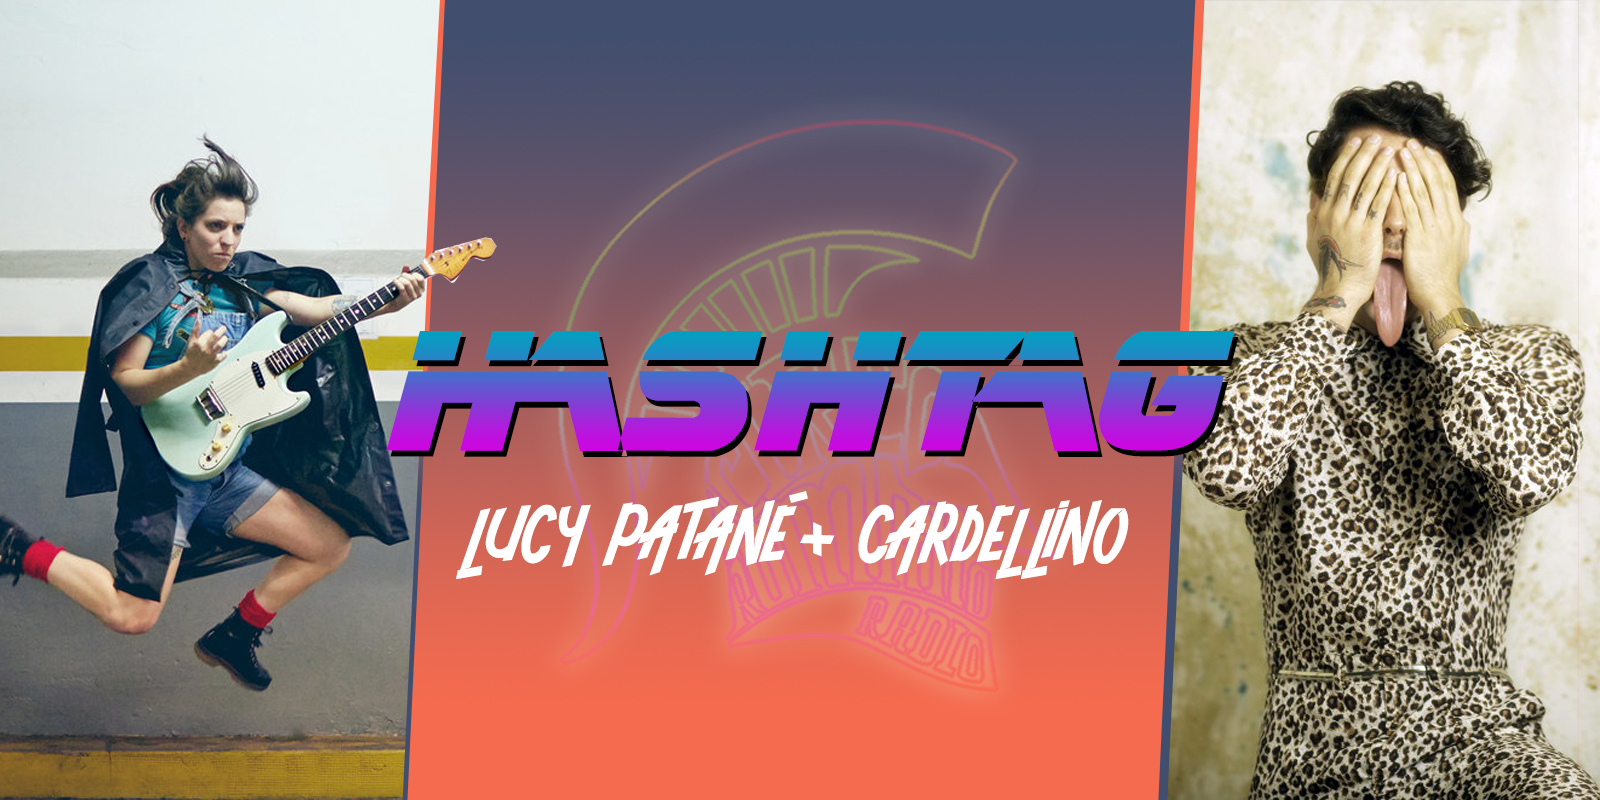 #HASHTAG Ep. 18: Lucy Patané + Cardellino